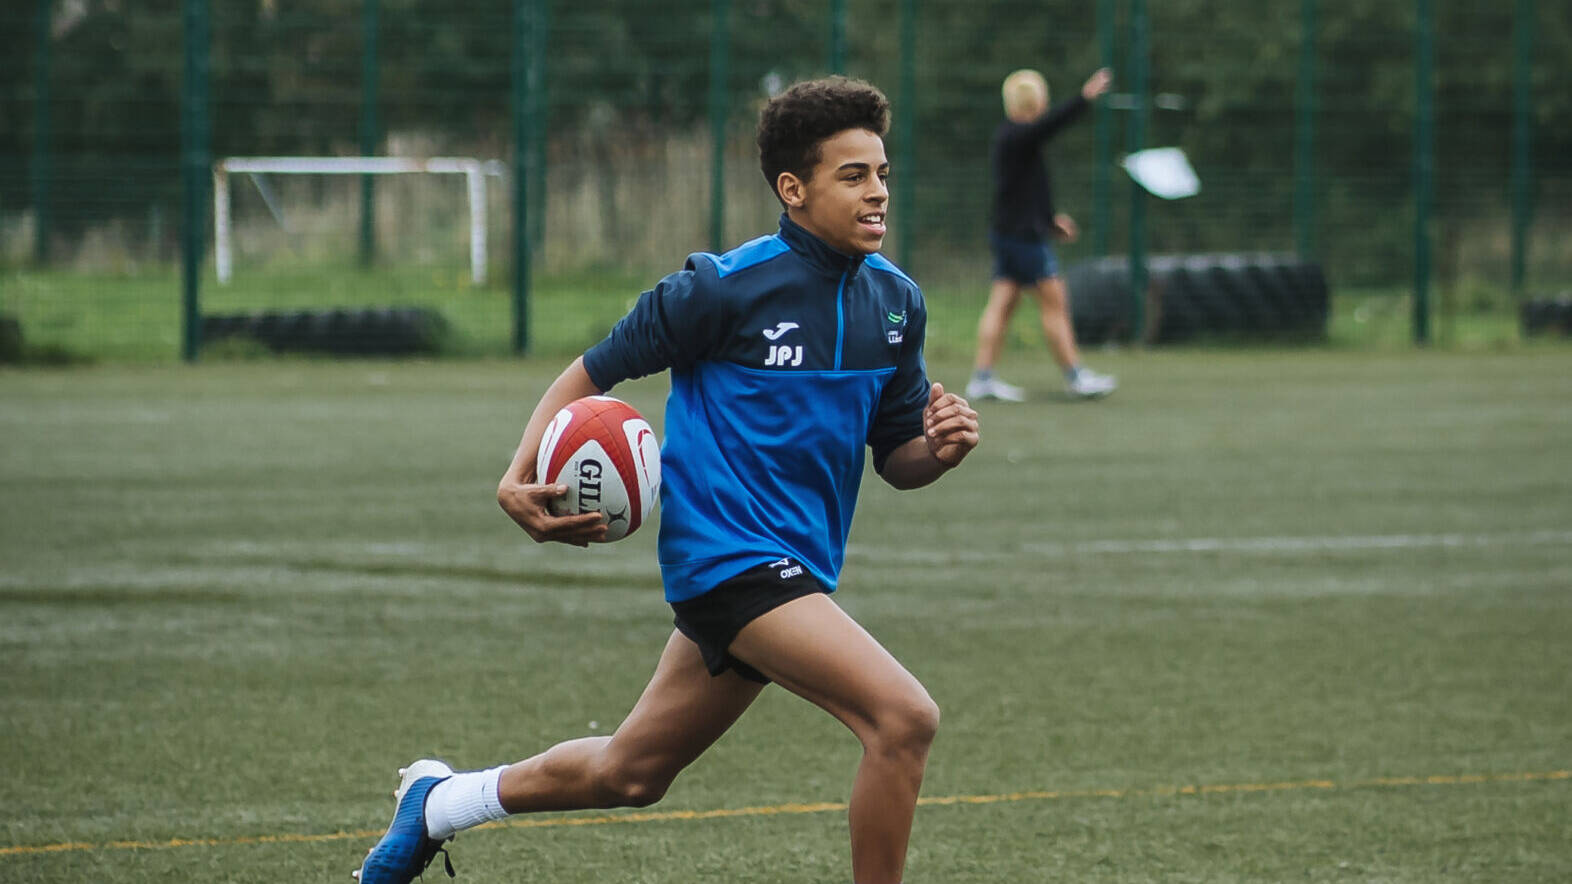 Student playing rugby